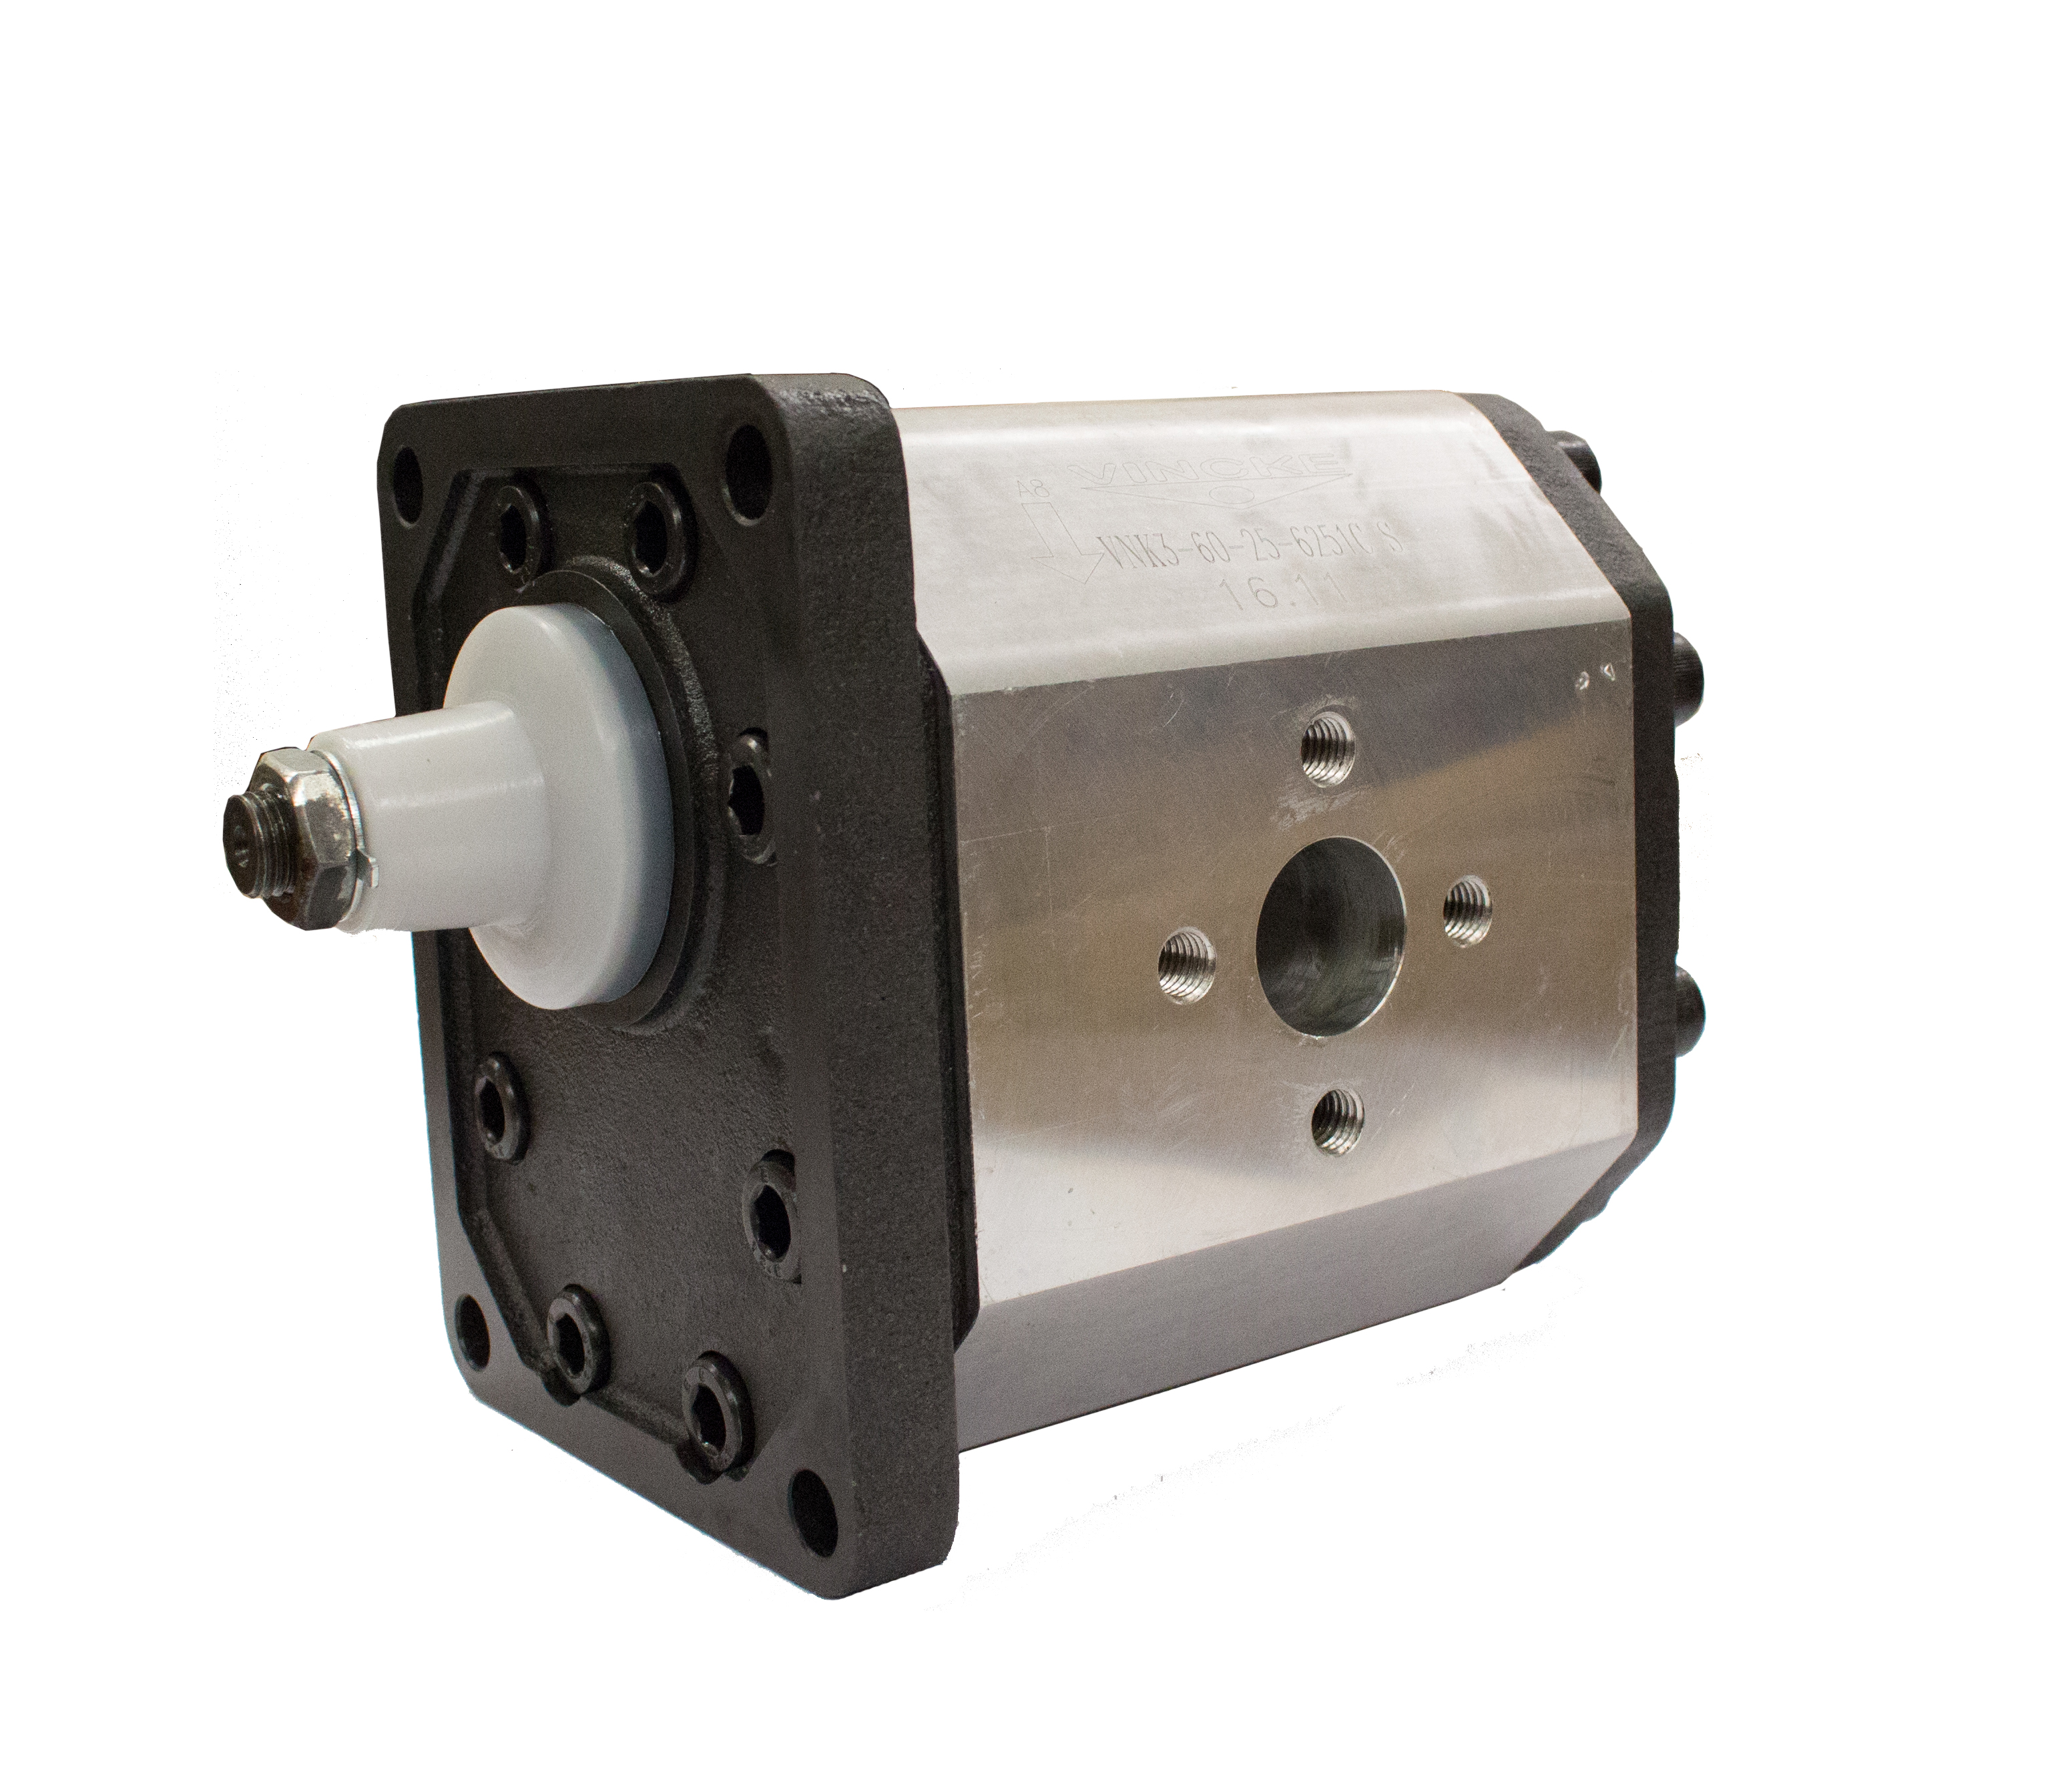 Flowfit Hydraulic Gear Pump, Group 3, Anti-Clockwise 70CC, 62mm Inlet x 51mm Outlet Flanged Ports, 4 Bolt EU Flange